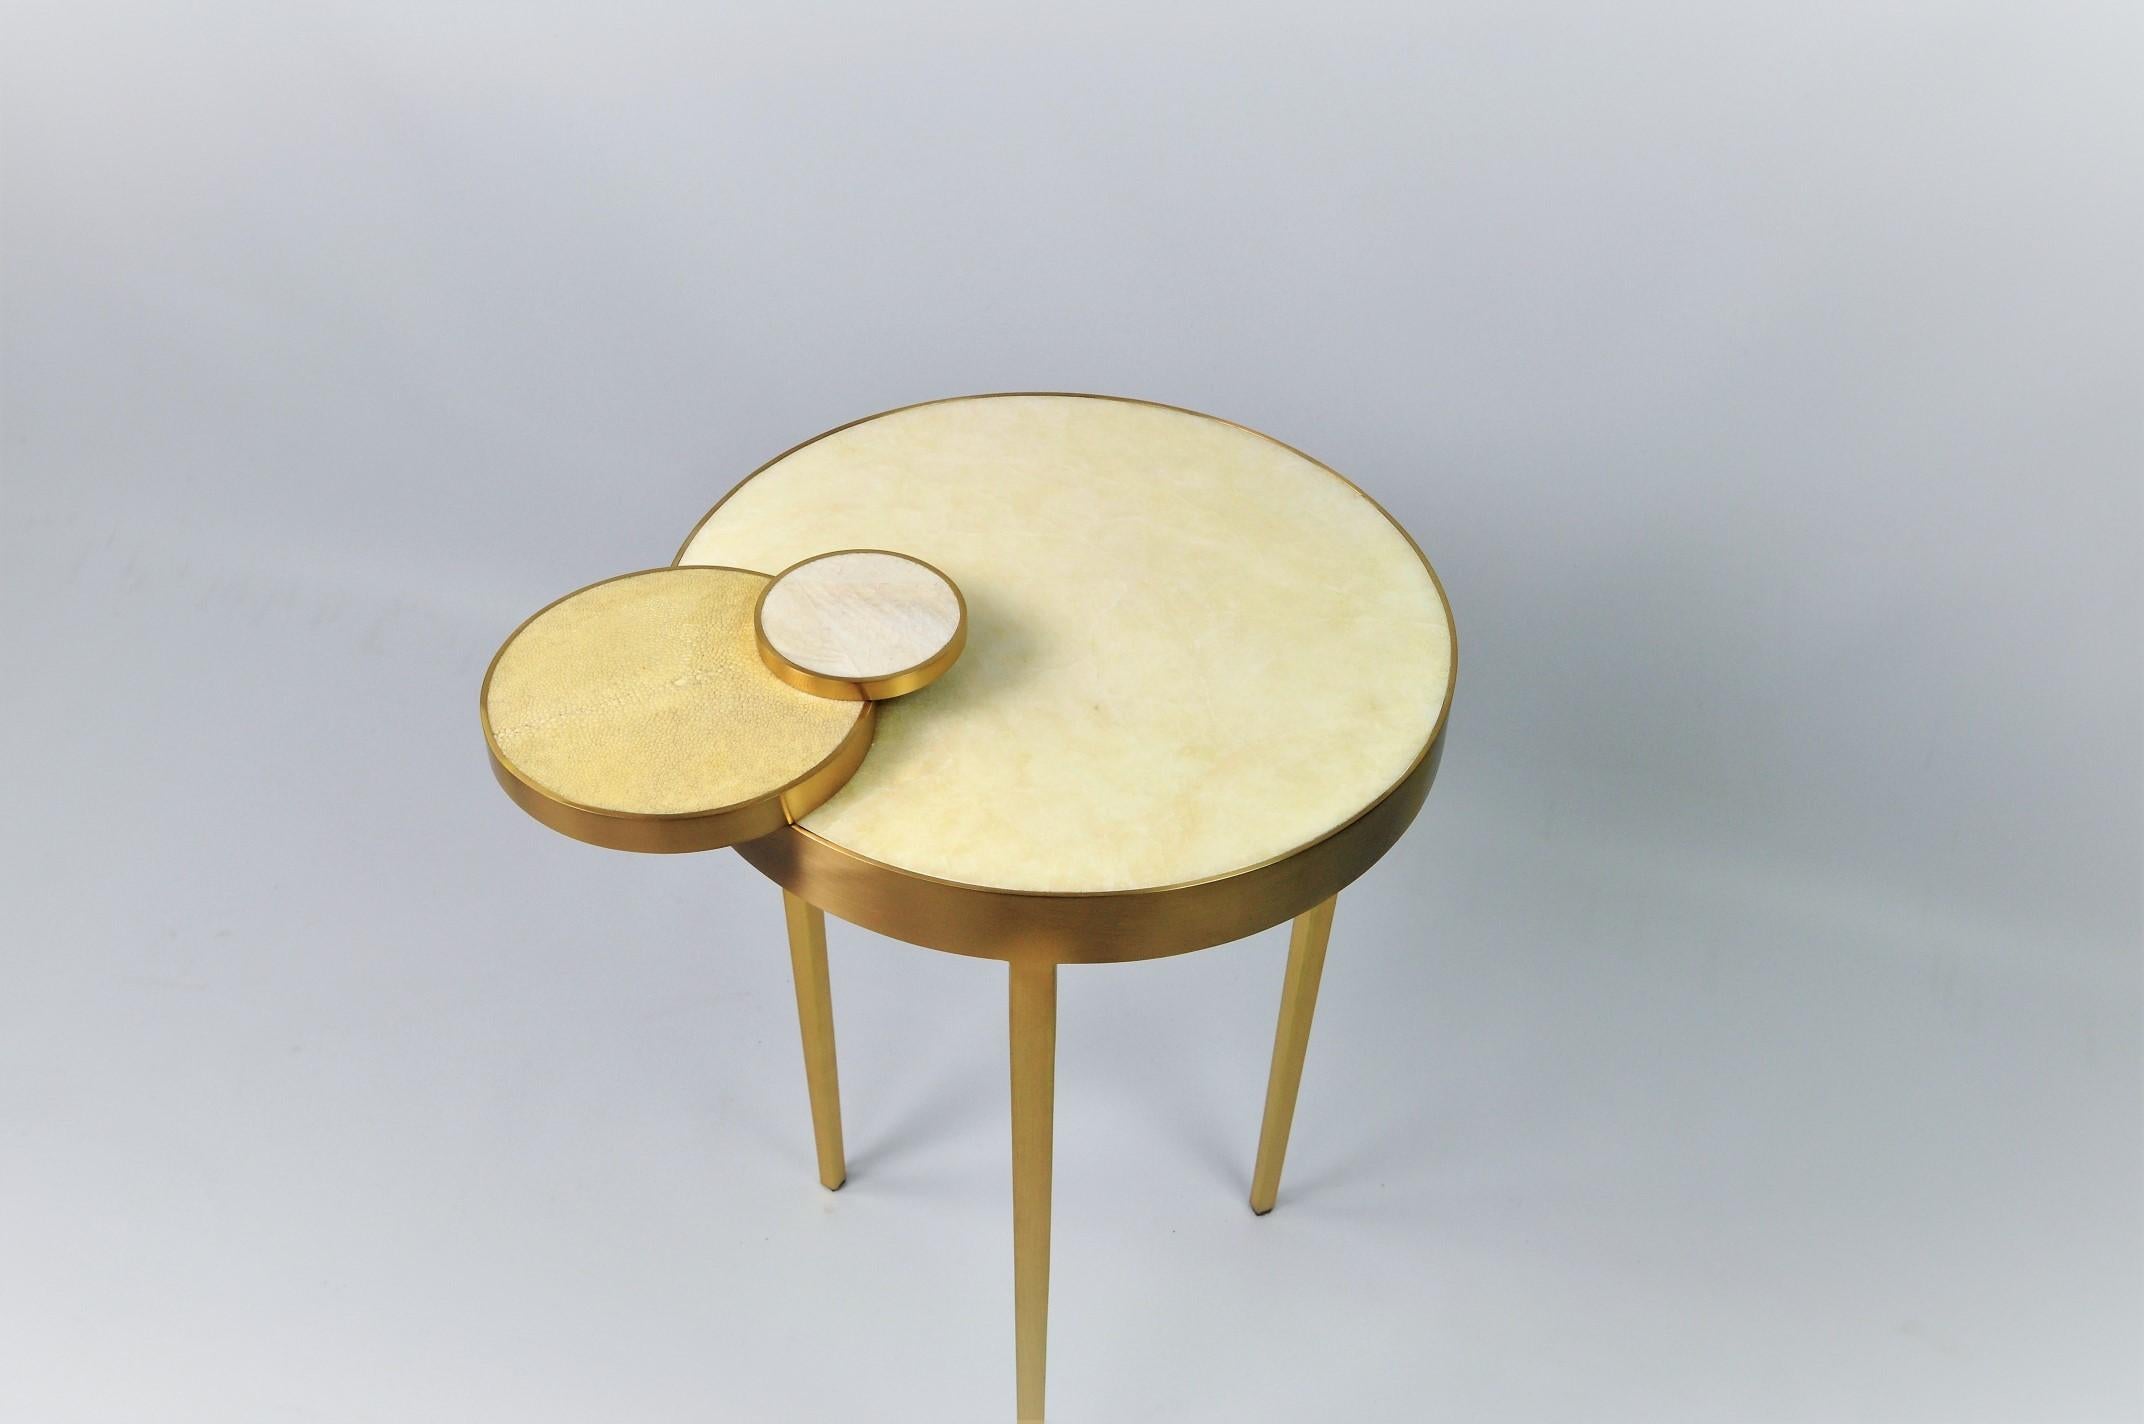 The CIRCULO side table by GINGER BROWN is made of brass with a round top in rock crystal marquetry.
The brass has been brushed to give a modern finish aspect.
The round decors have different finishes. While the larger one is in shagreen, the